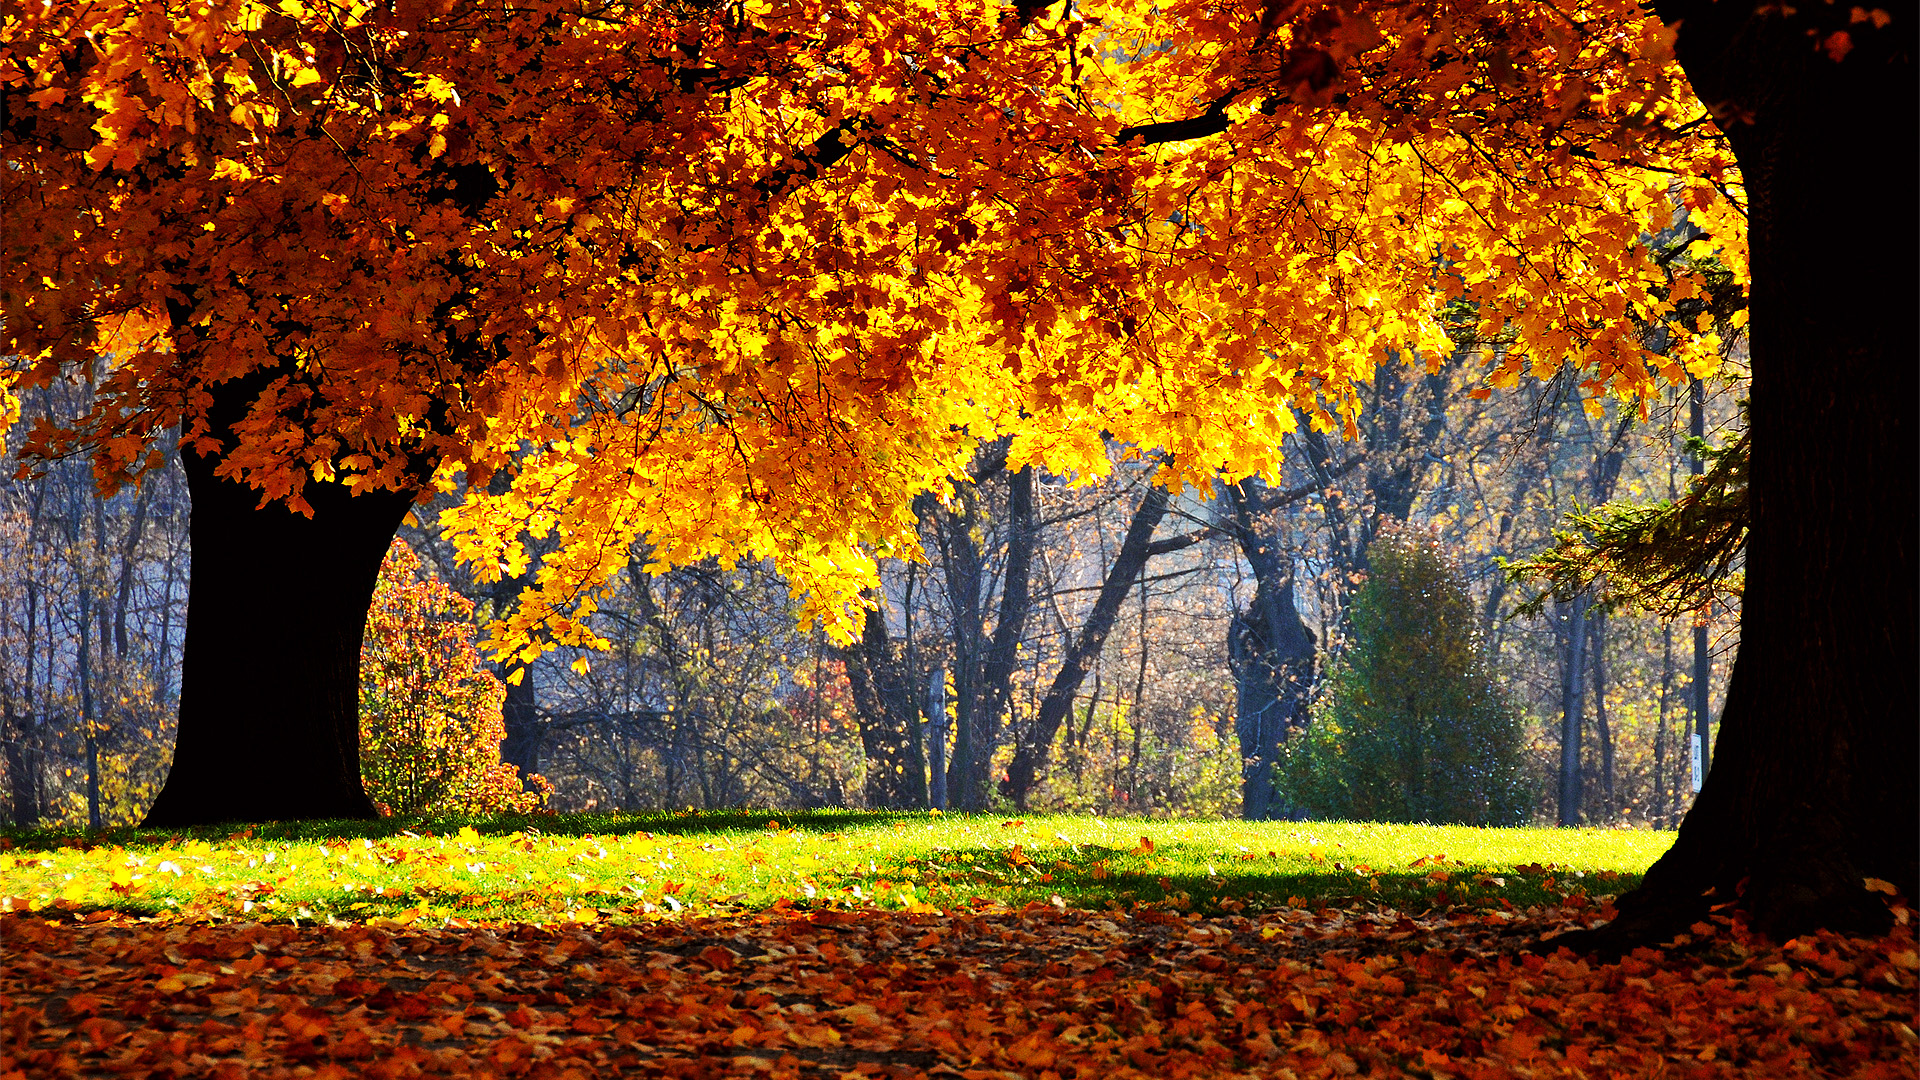 Autumn Cool Nature Picture Wallpaper Background